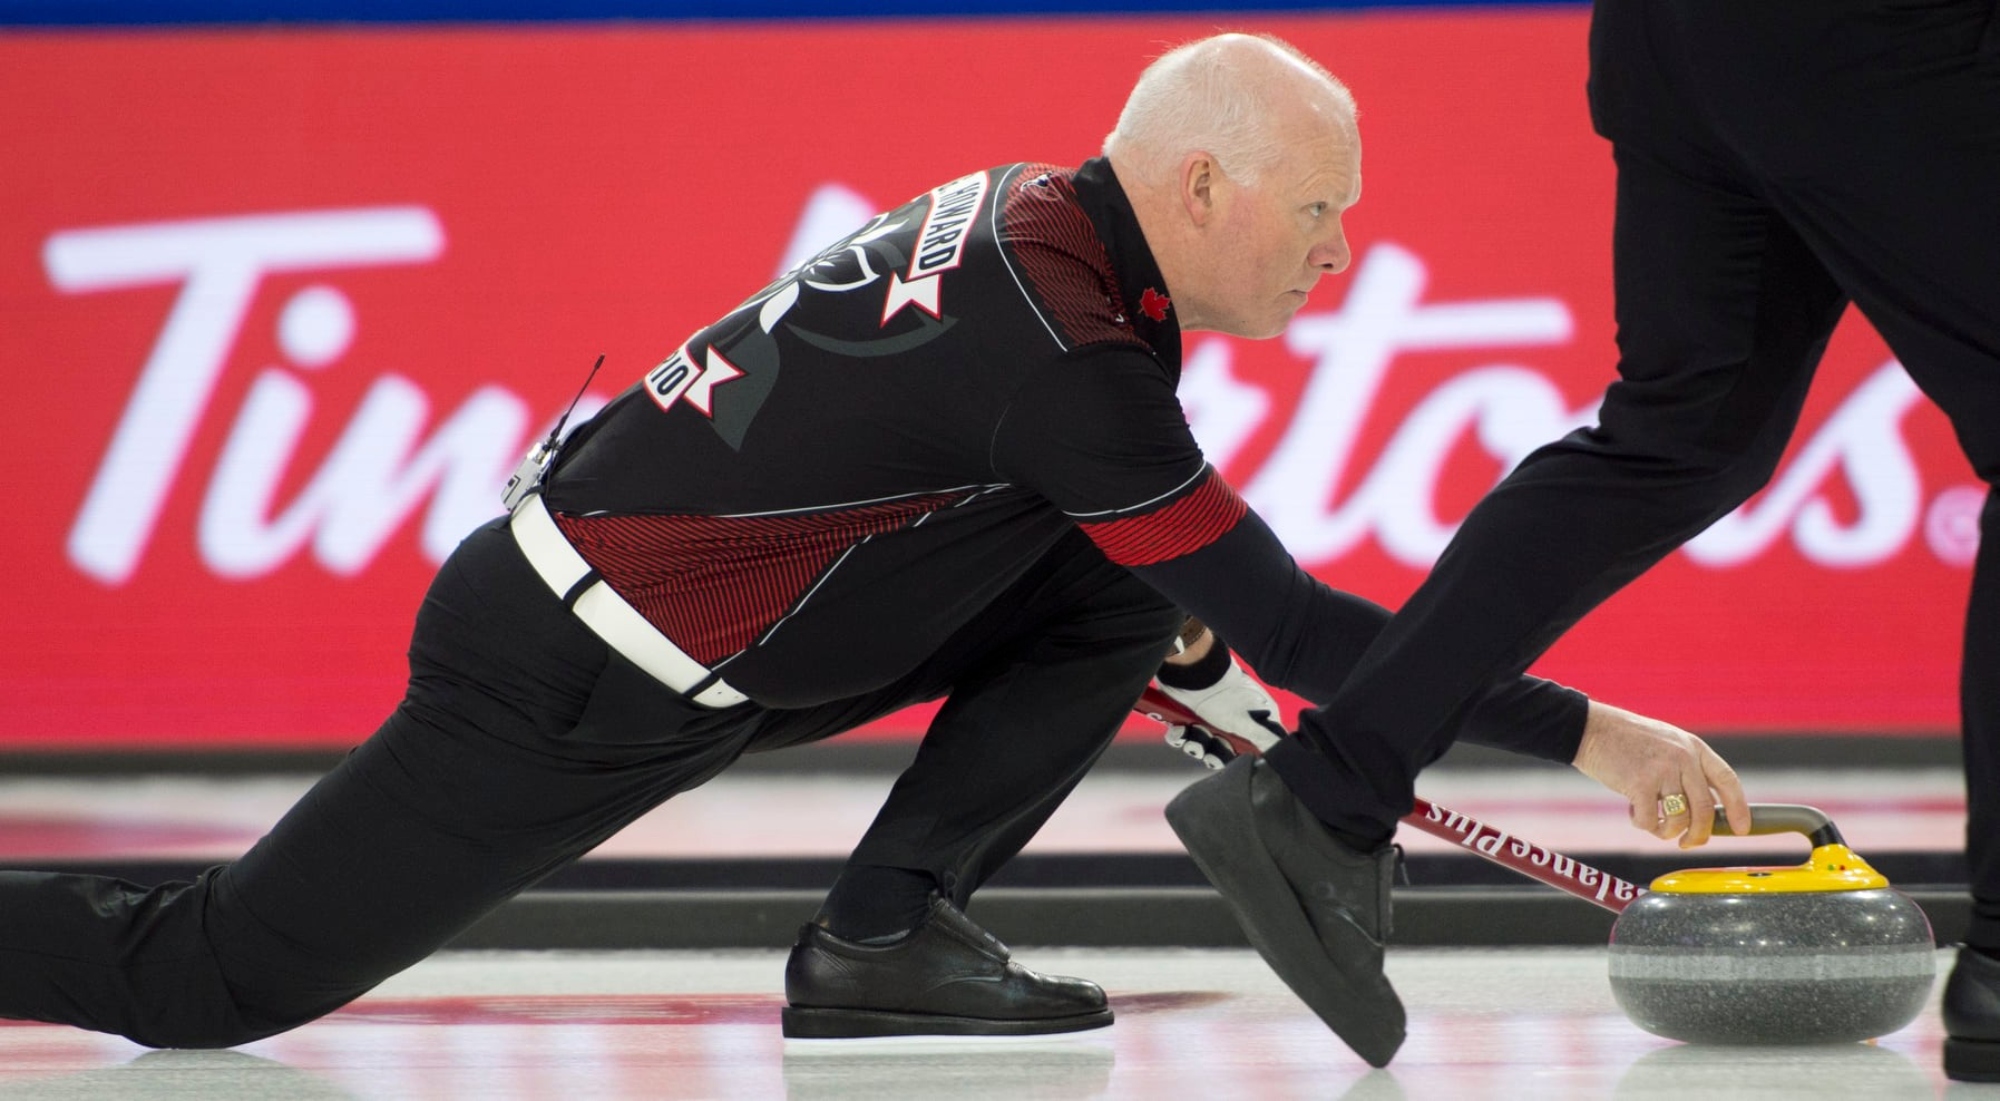 Playoff hopes take a hit for Team Howard at Brier